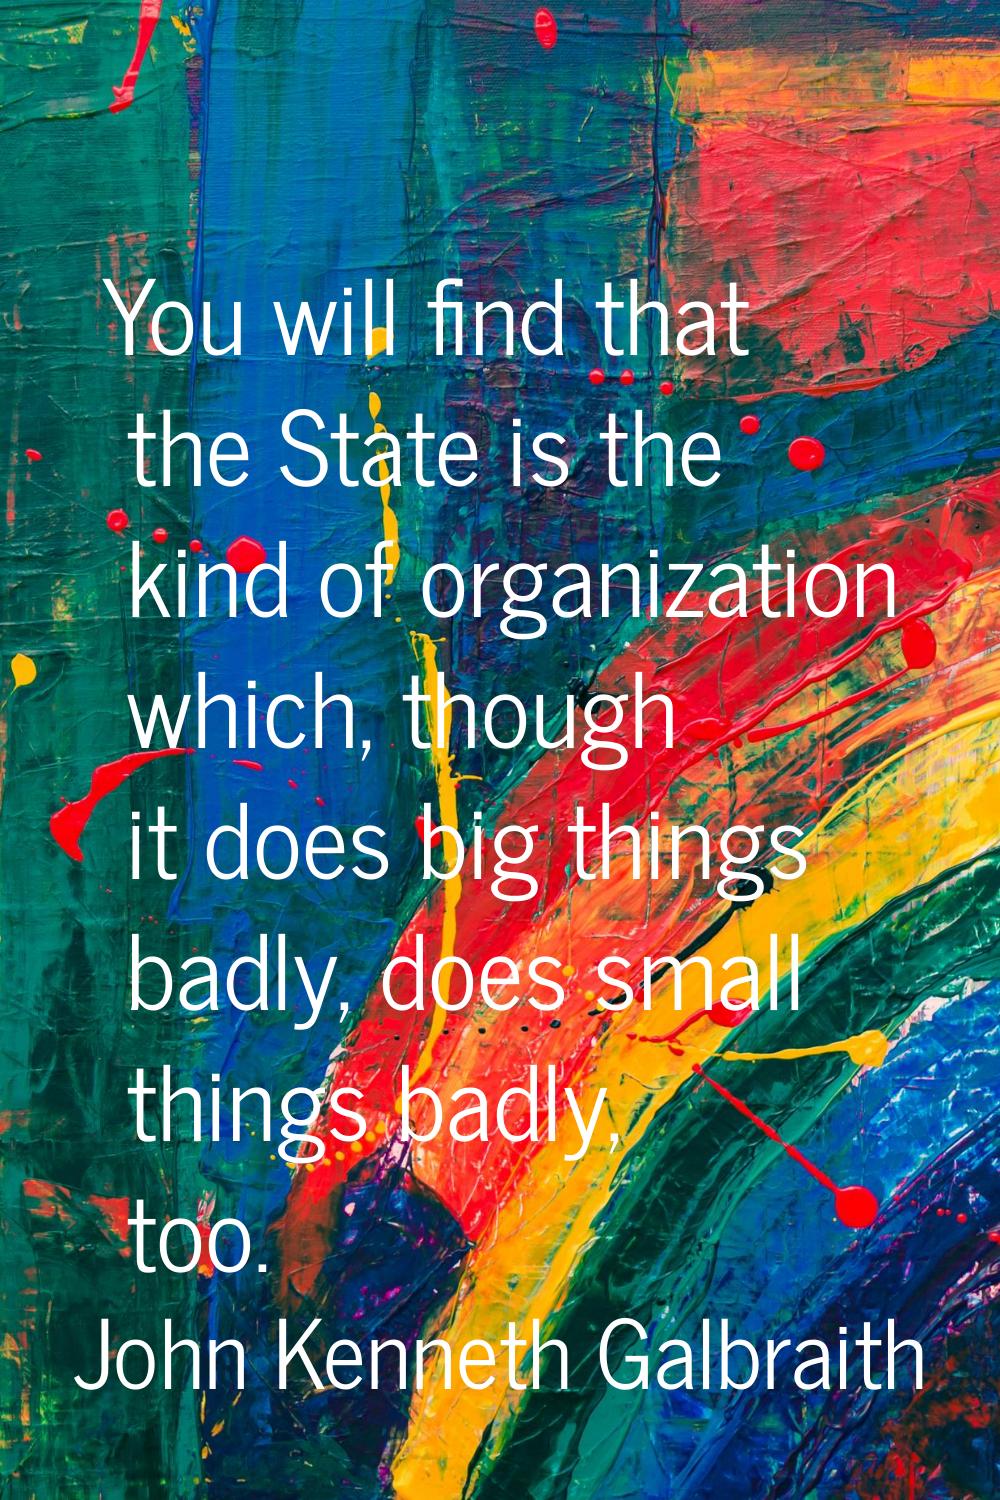 You will find that the State is the kind of organization which, though it does big things badly, do